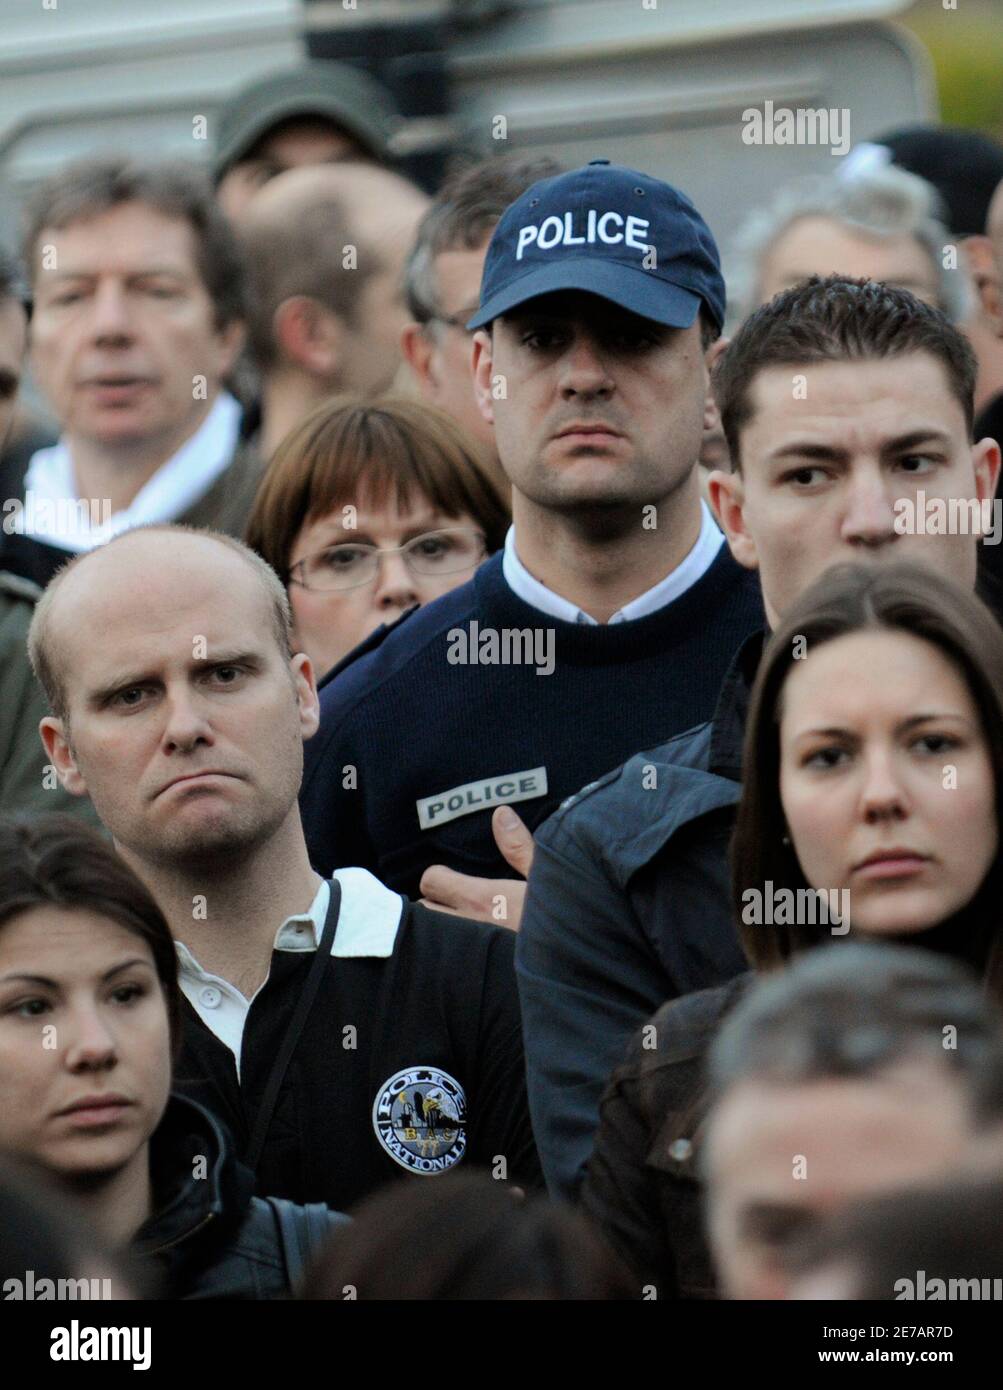 Friends, colleagues and relatives of slain French police officer Jean-Serge  Nerin gather in his memory in Dammarie-les-Lys, near Paris March 17, 2010.  A French police officer was shot and killed on Tuesday